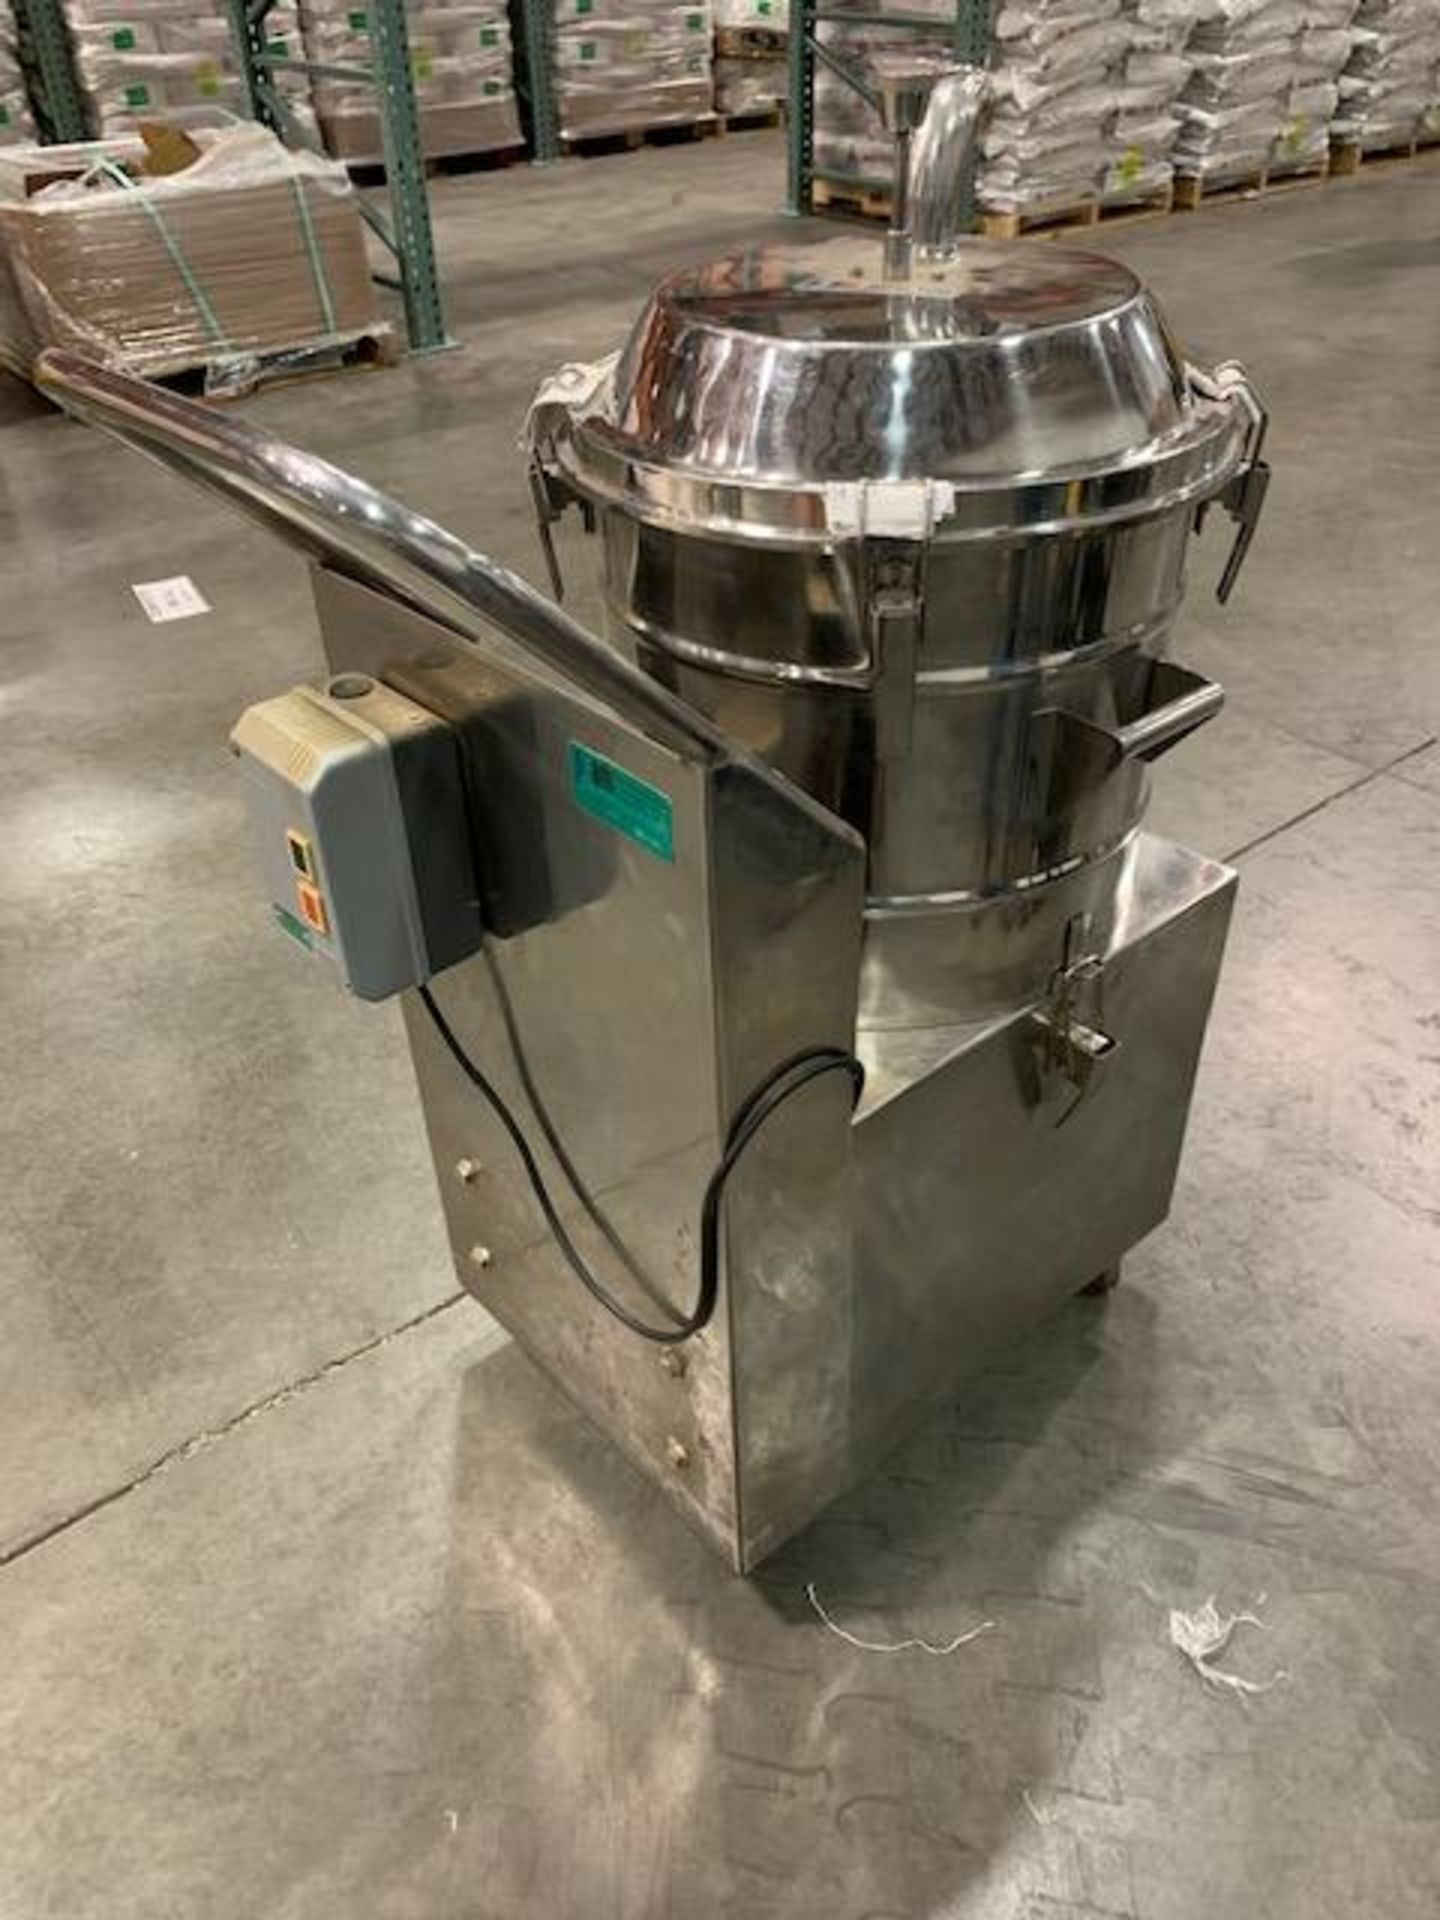 PAM model ADU-100 Stainless steel dust collector, 100 CFM, On Casters. Serial#ADU-1401 Item#283 - Image 2 of 4